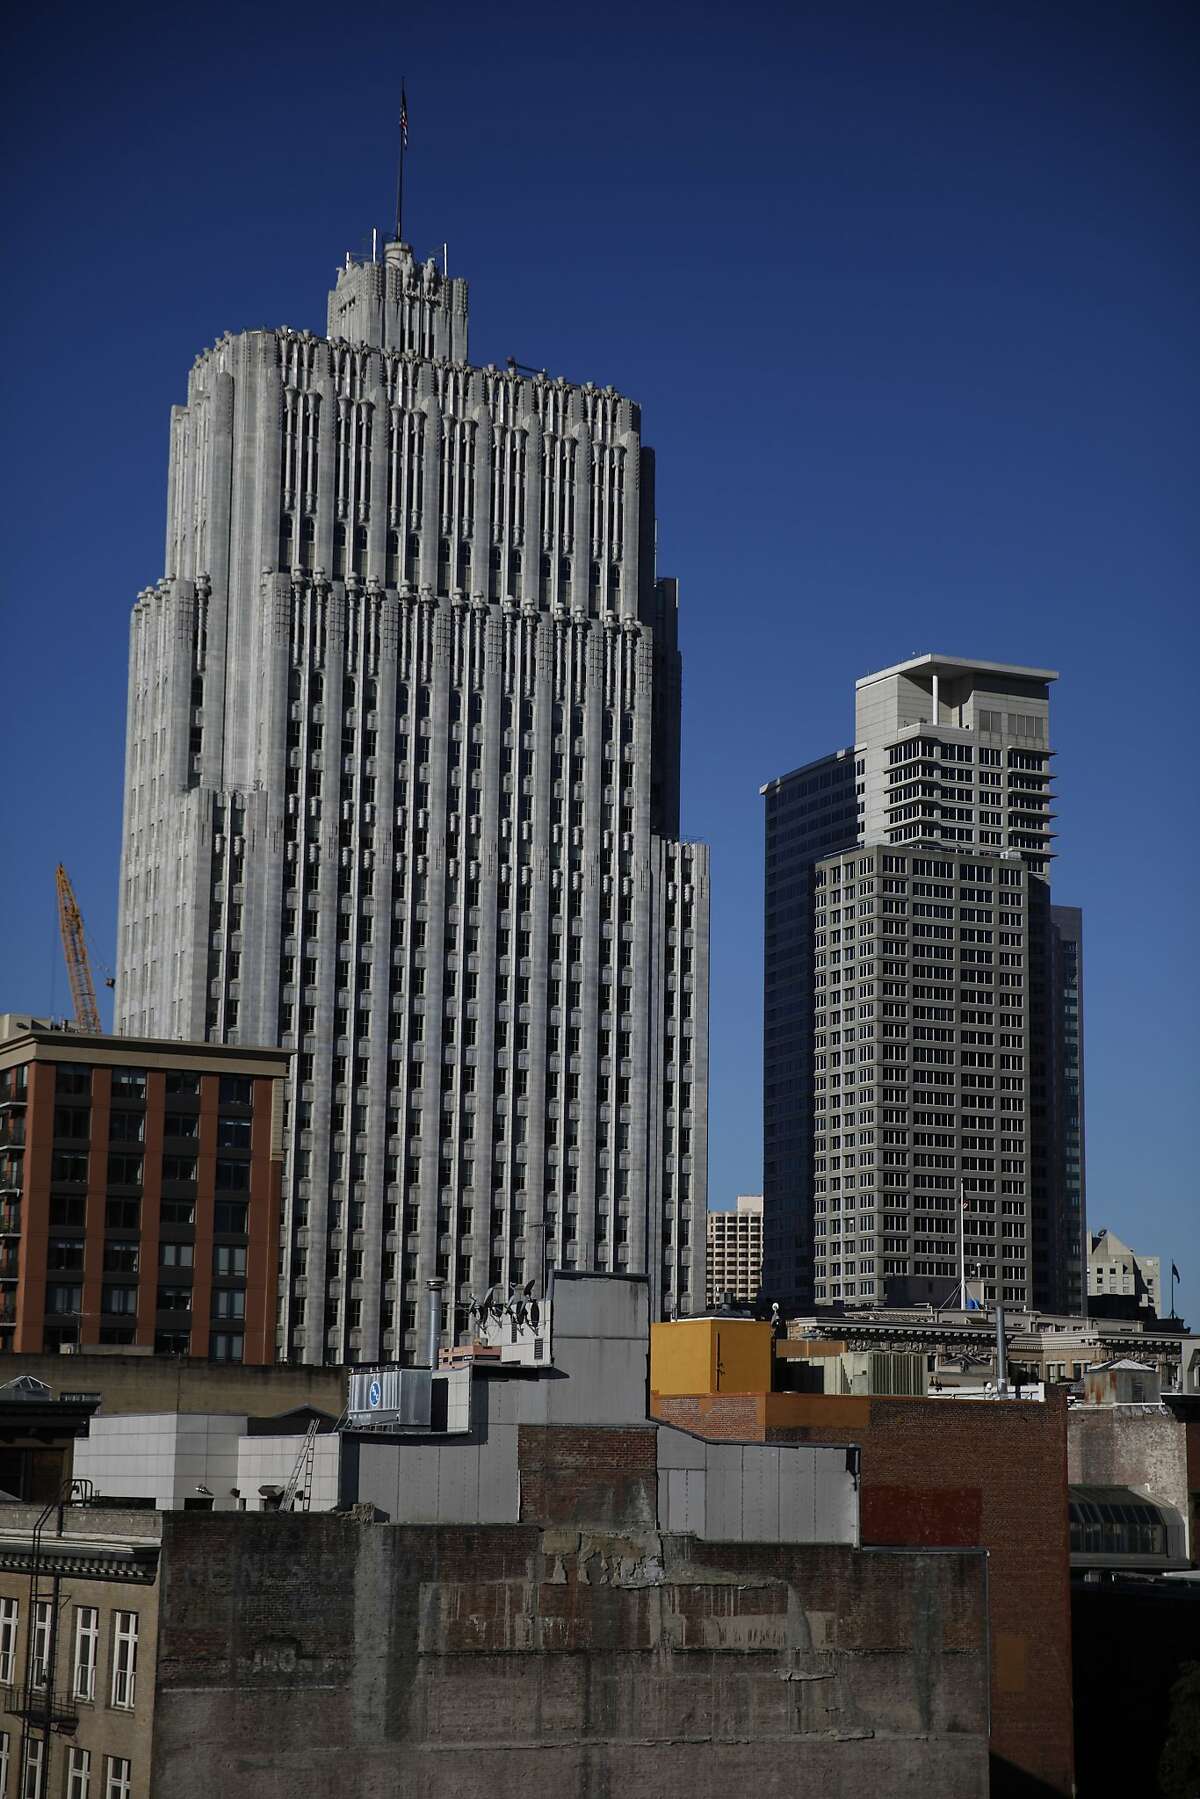 140 New Montgomery Street (tallest building) is seen among other buildings on Tuesday, March 18, 2014, in San Francisco, Calif.